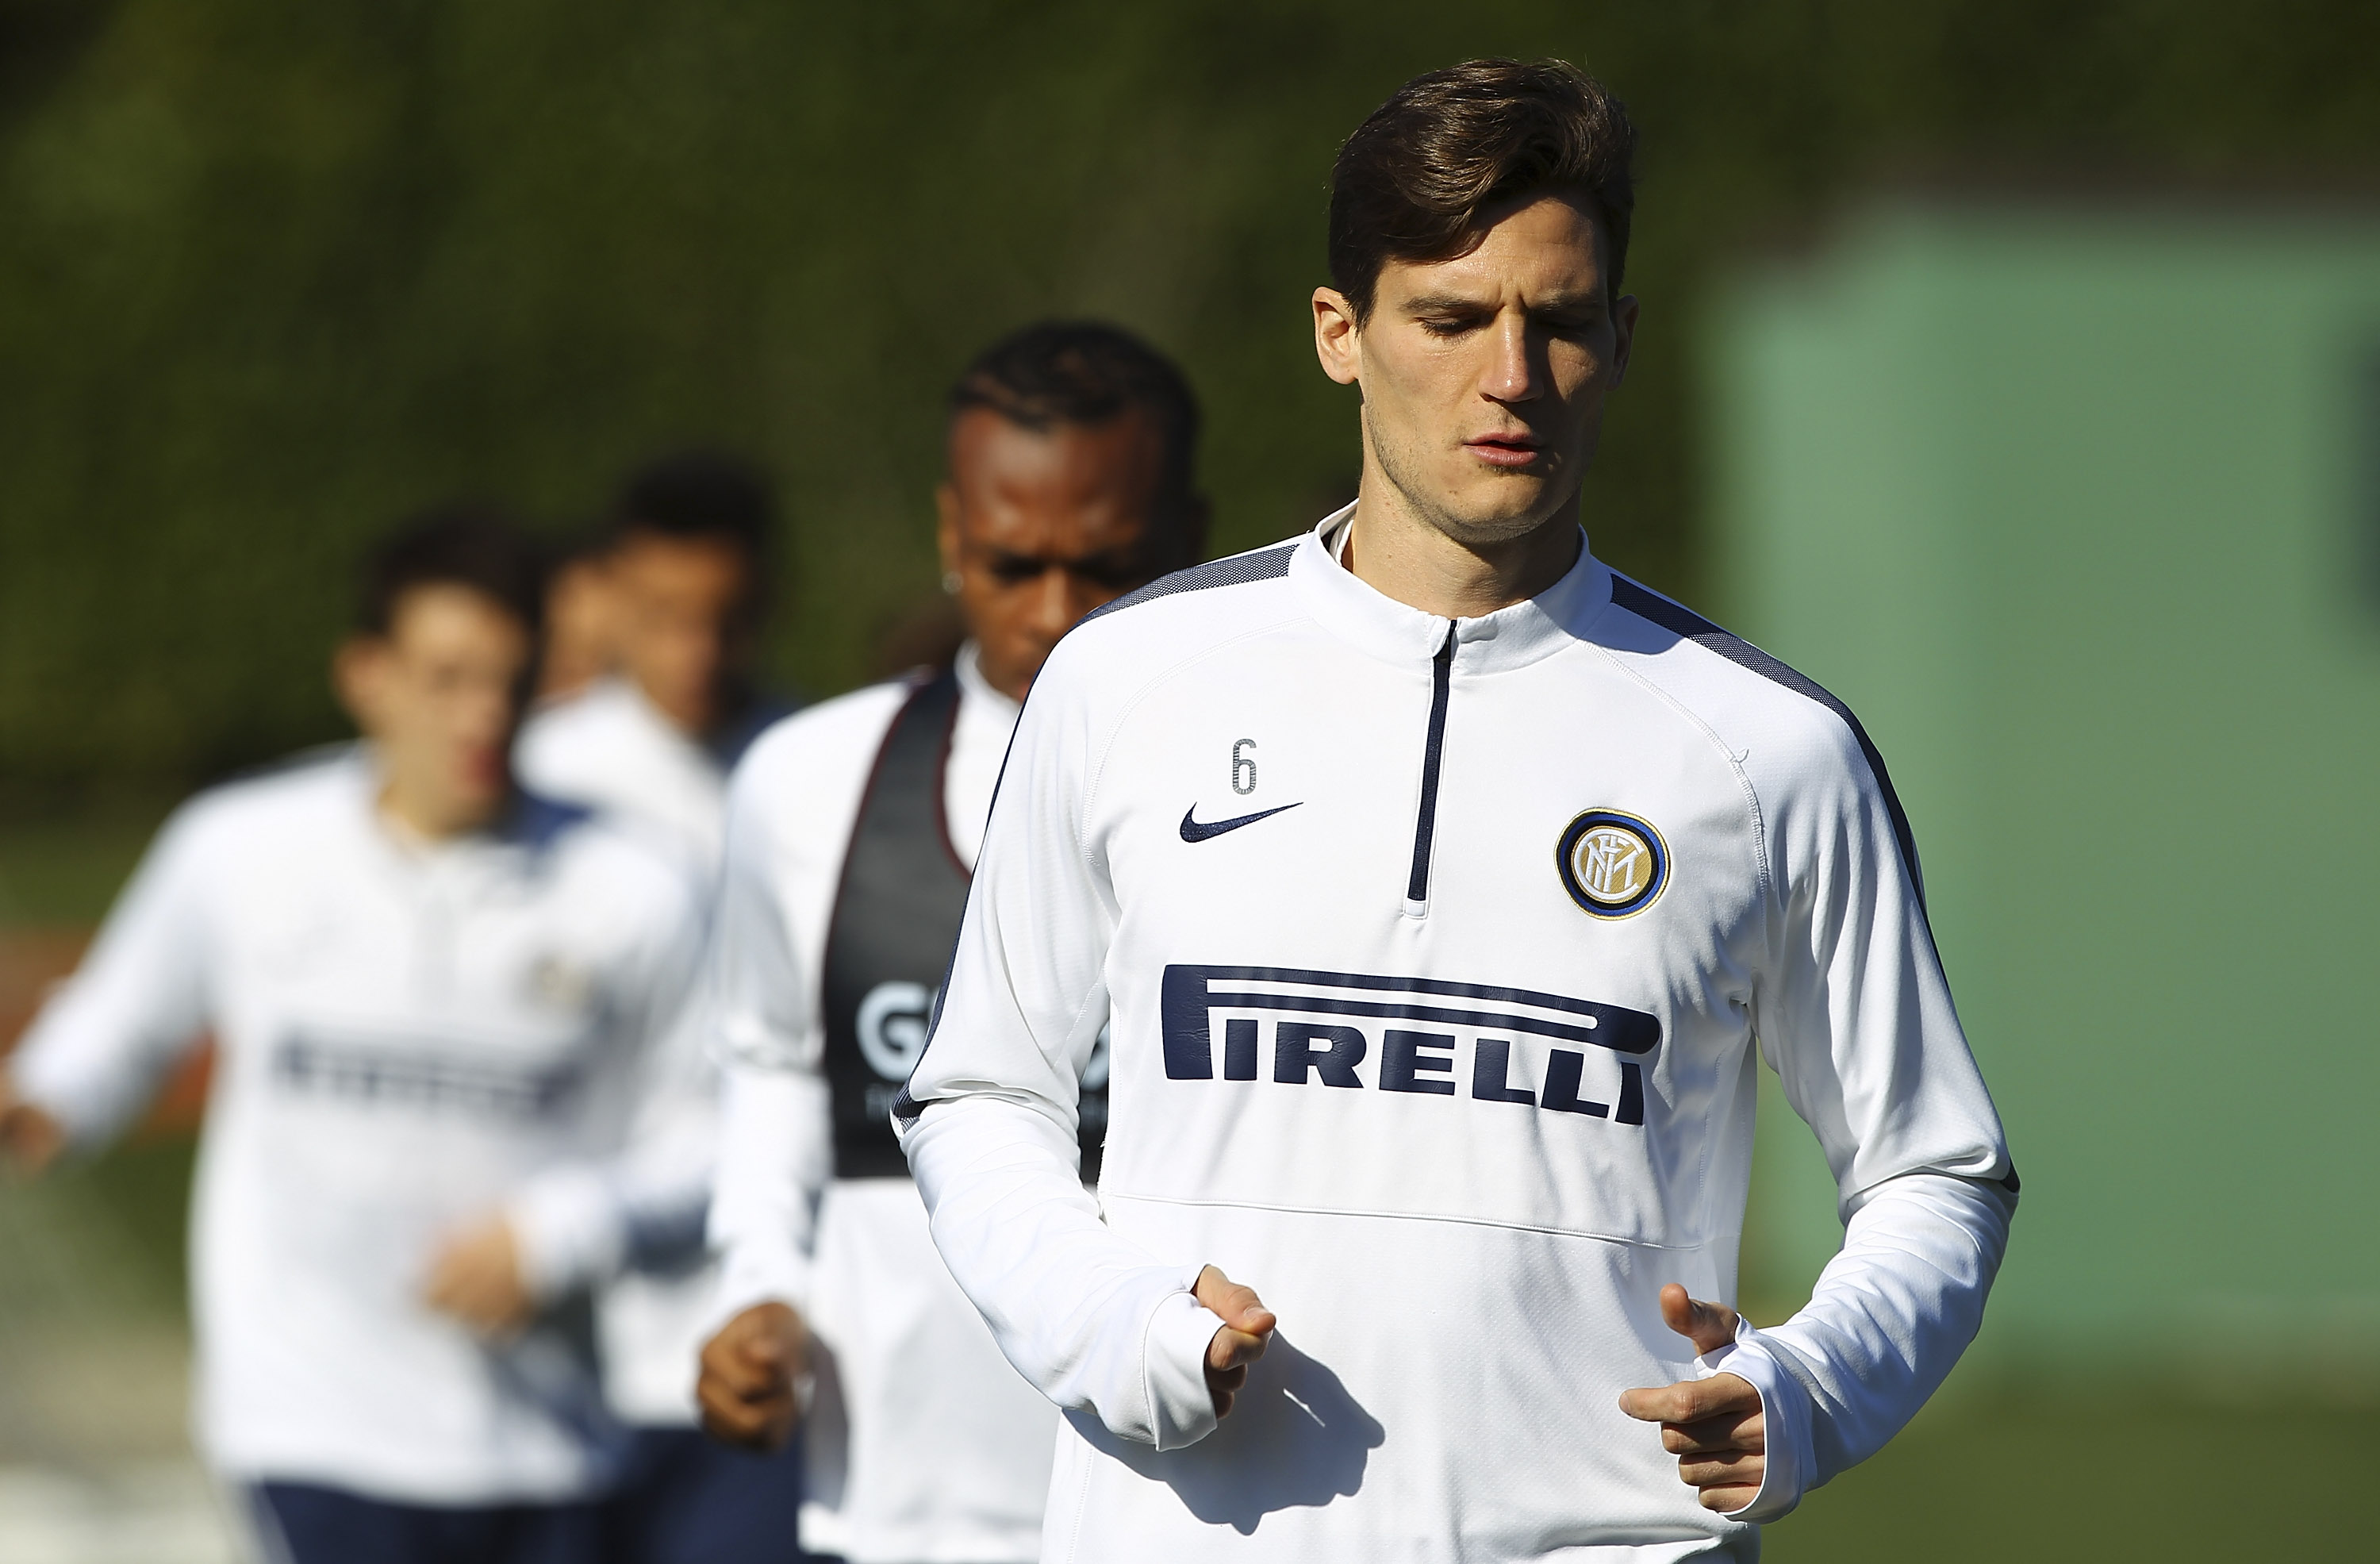 SportItalia – Andreolli set to renew with Inter